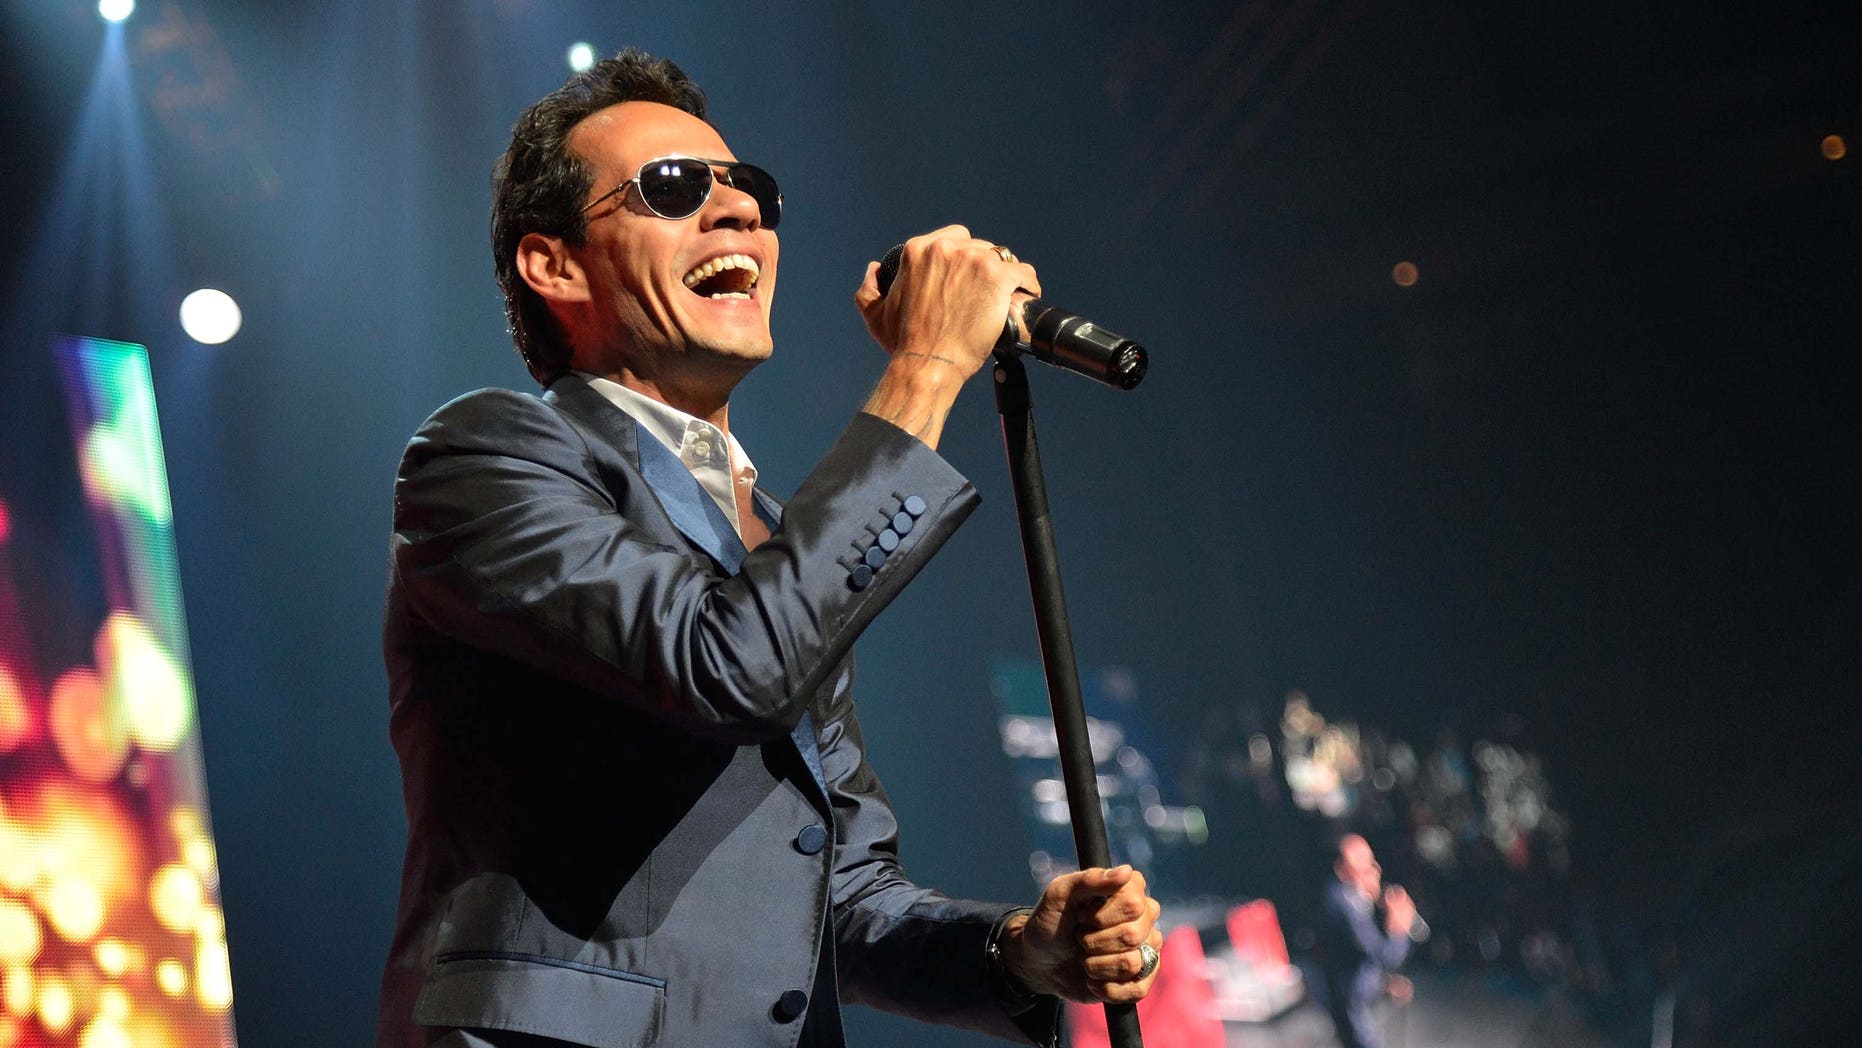 Democratic Convention Marc Anthony To Sing National Anthem Fox News 6372